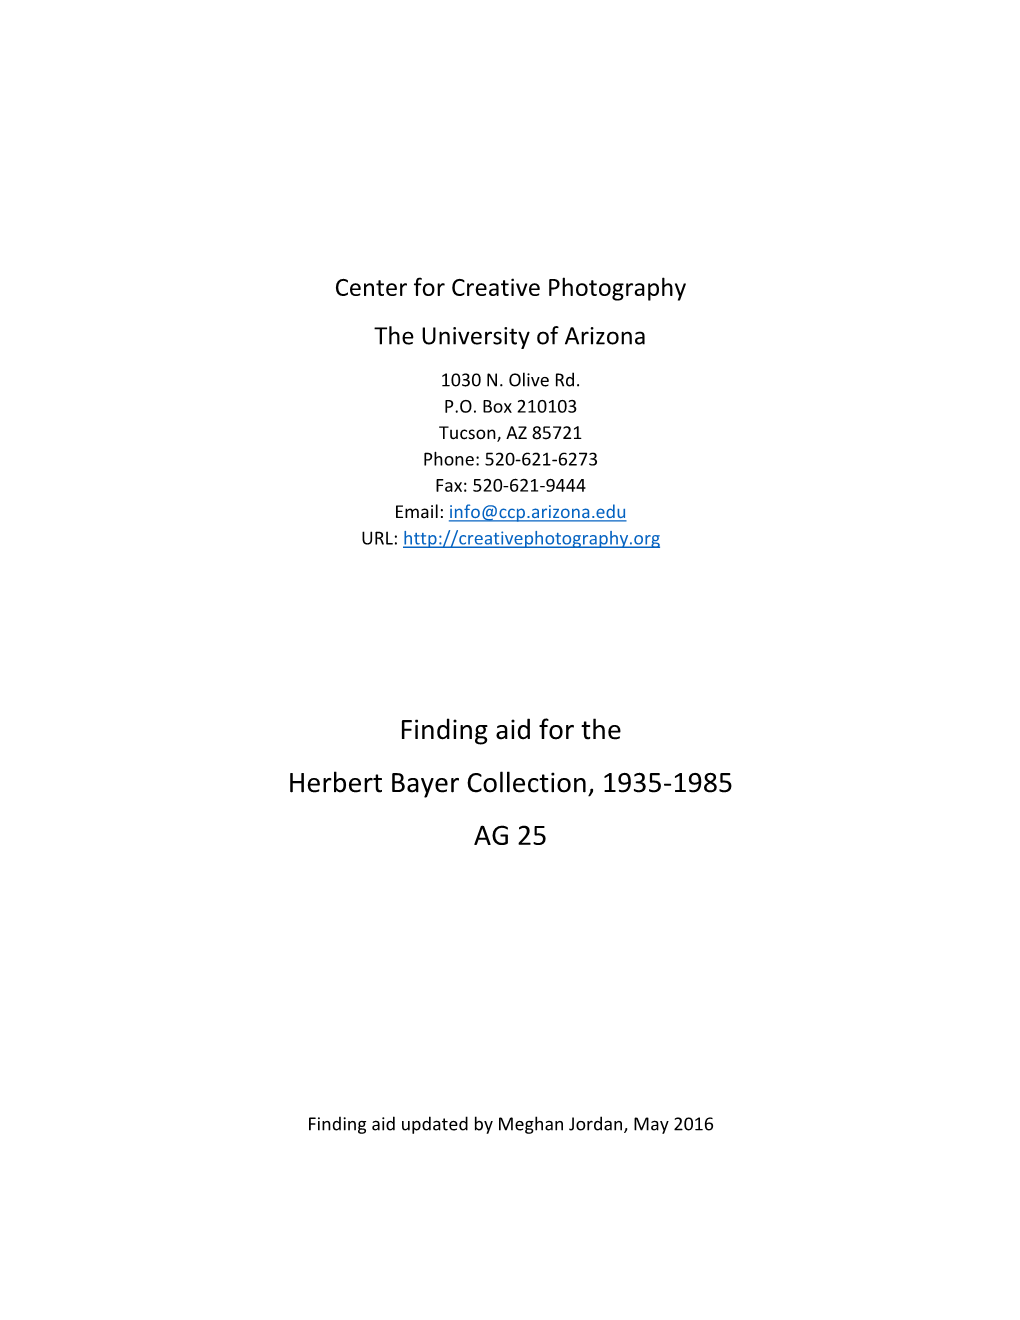 Finding Aid for the Herbert Bayer Collection, 1935-1985 AG 25